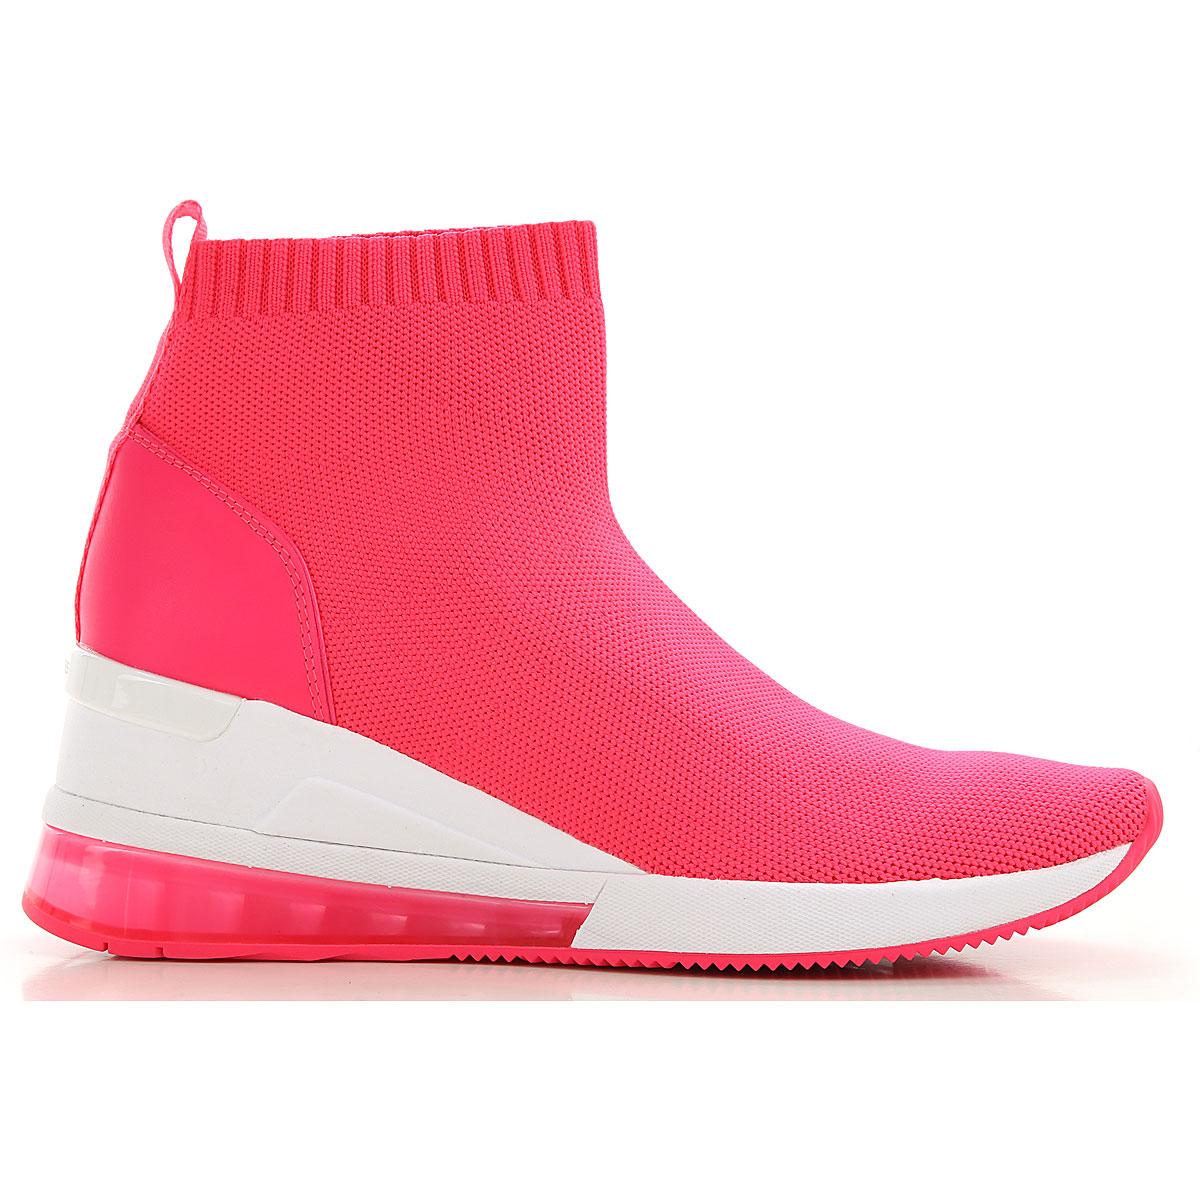 Michael Kors Shoes For Women in Neon Pink (Pink) Lyst